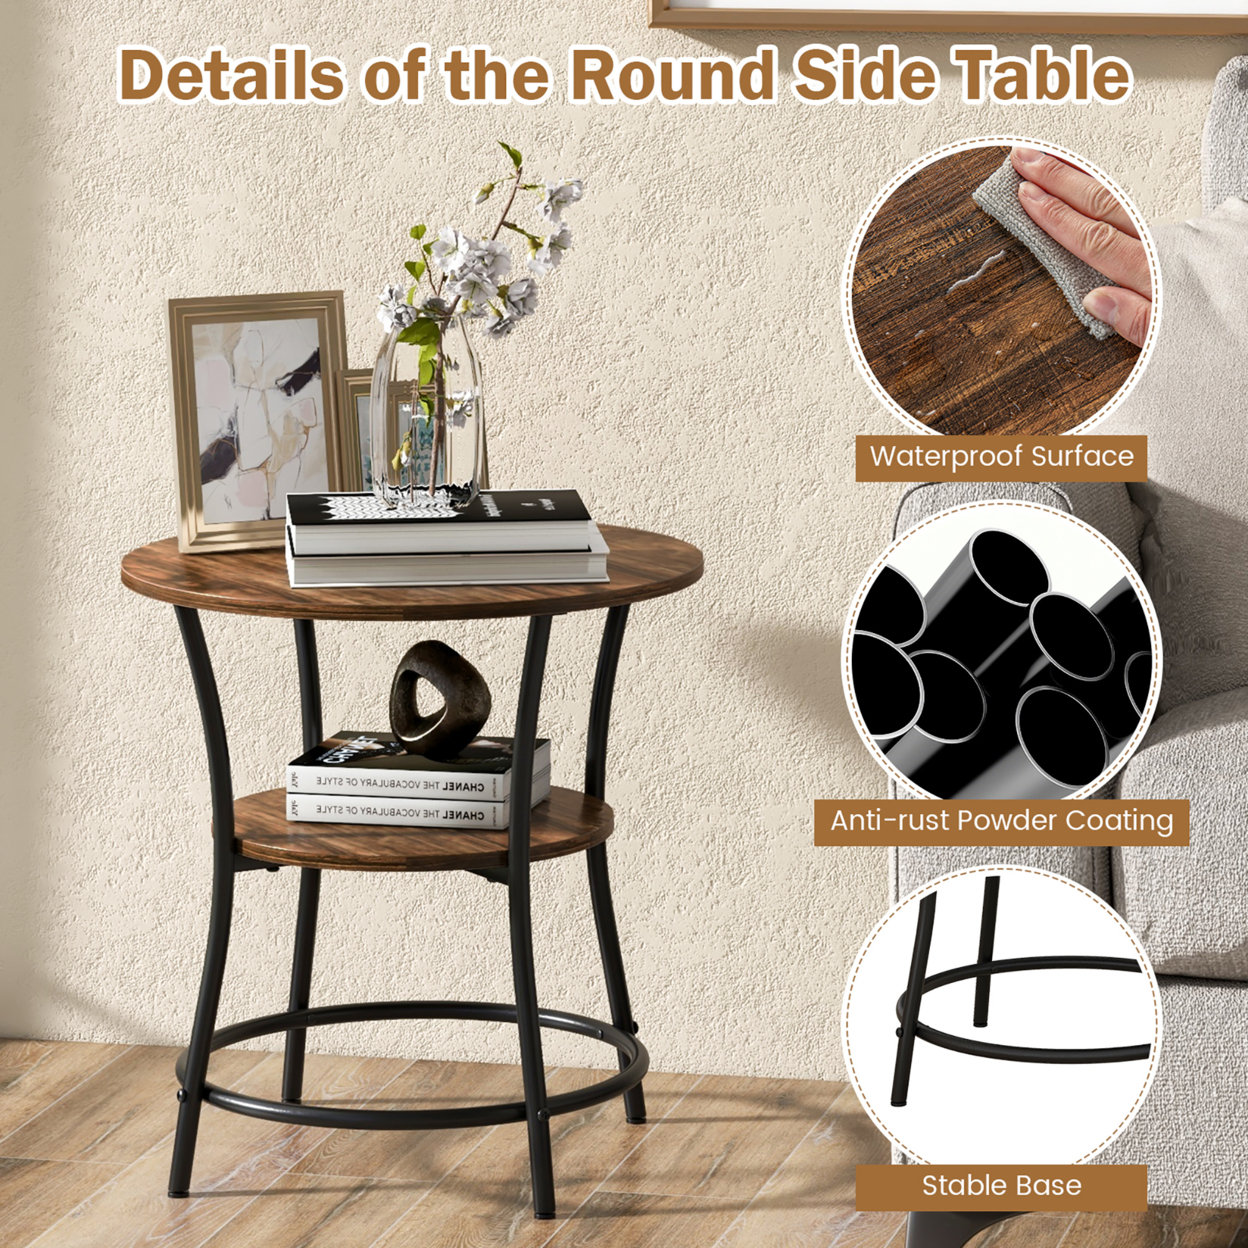 2-Tier Side Table Compact Round Metal Frame Coffee Table W/ Open Shelf - Brown